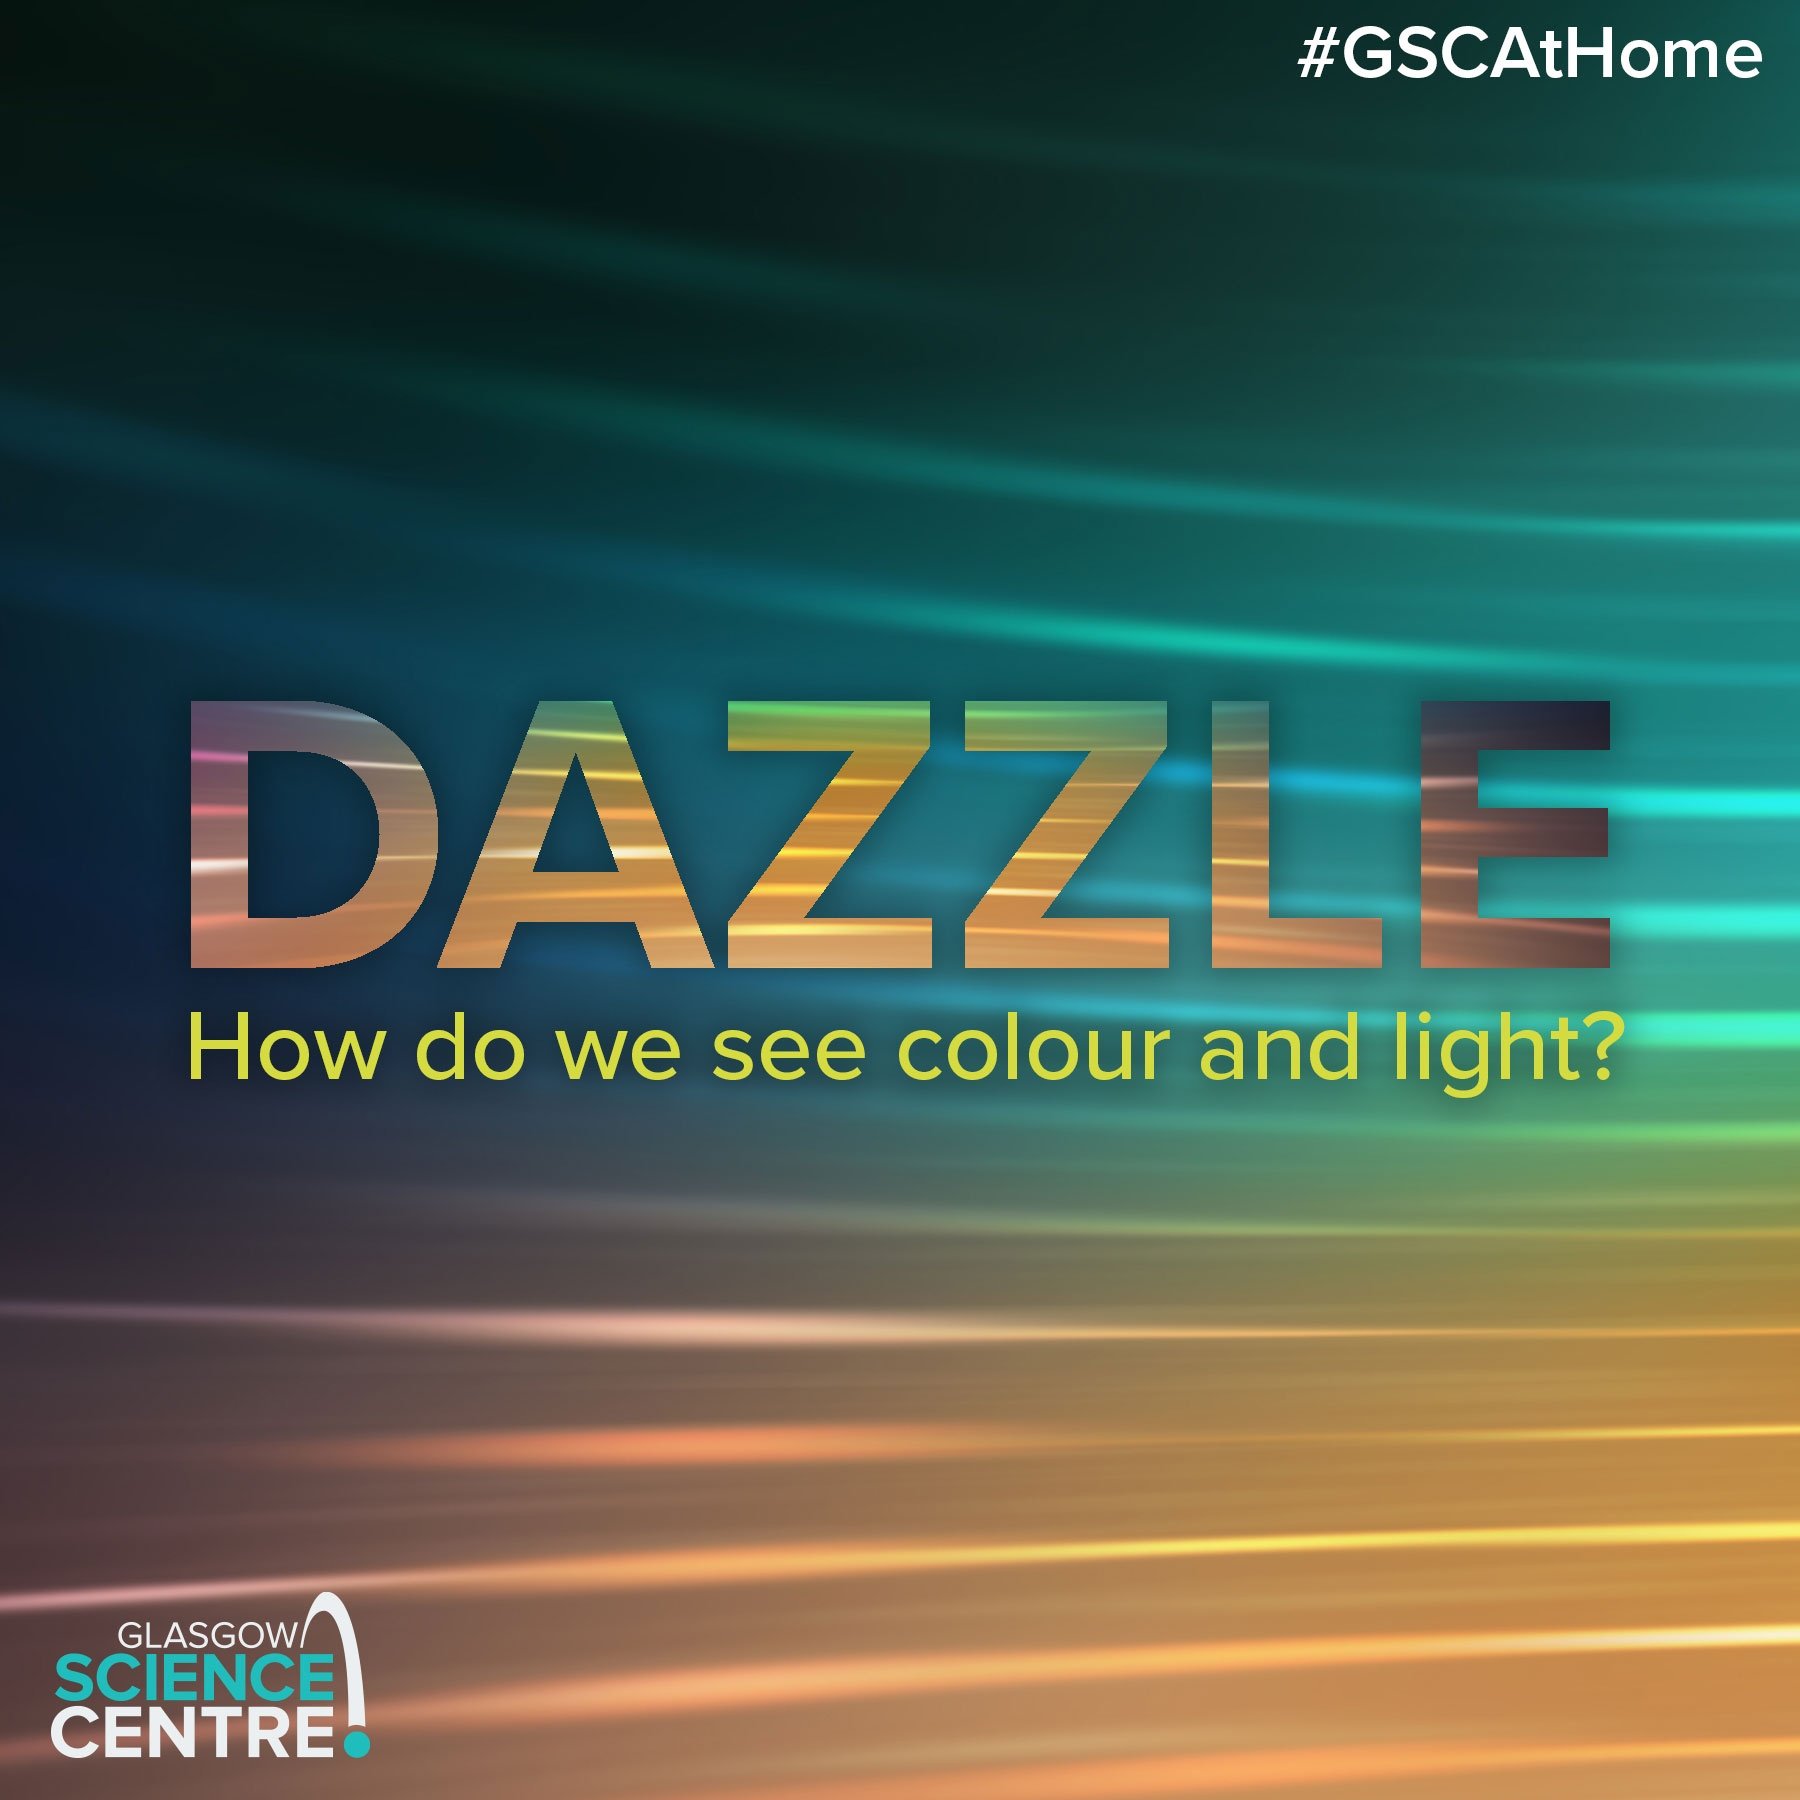 An illustrated graphic has the words "Dazzle. How do we see colour and light?" printed against a green and orange background.